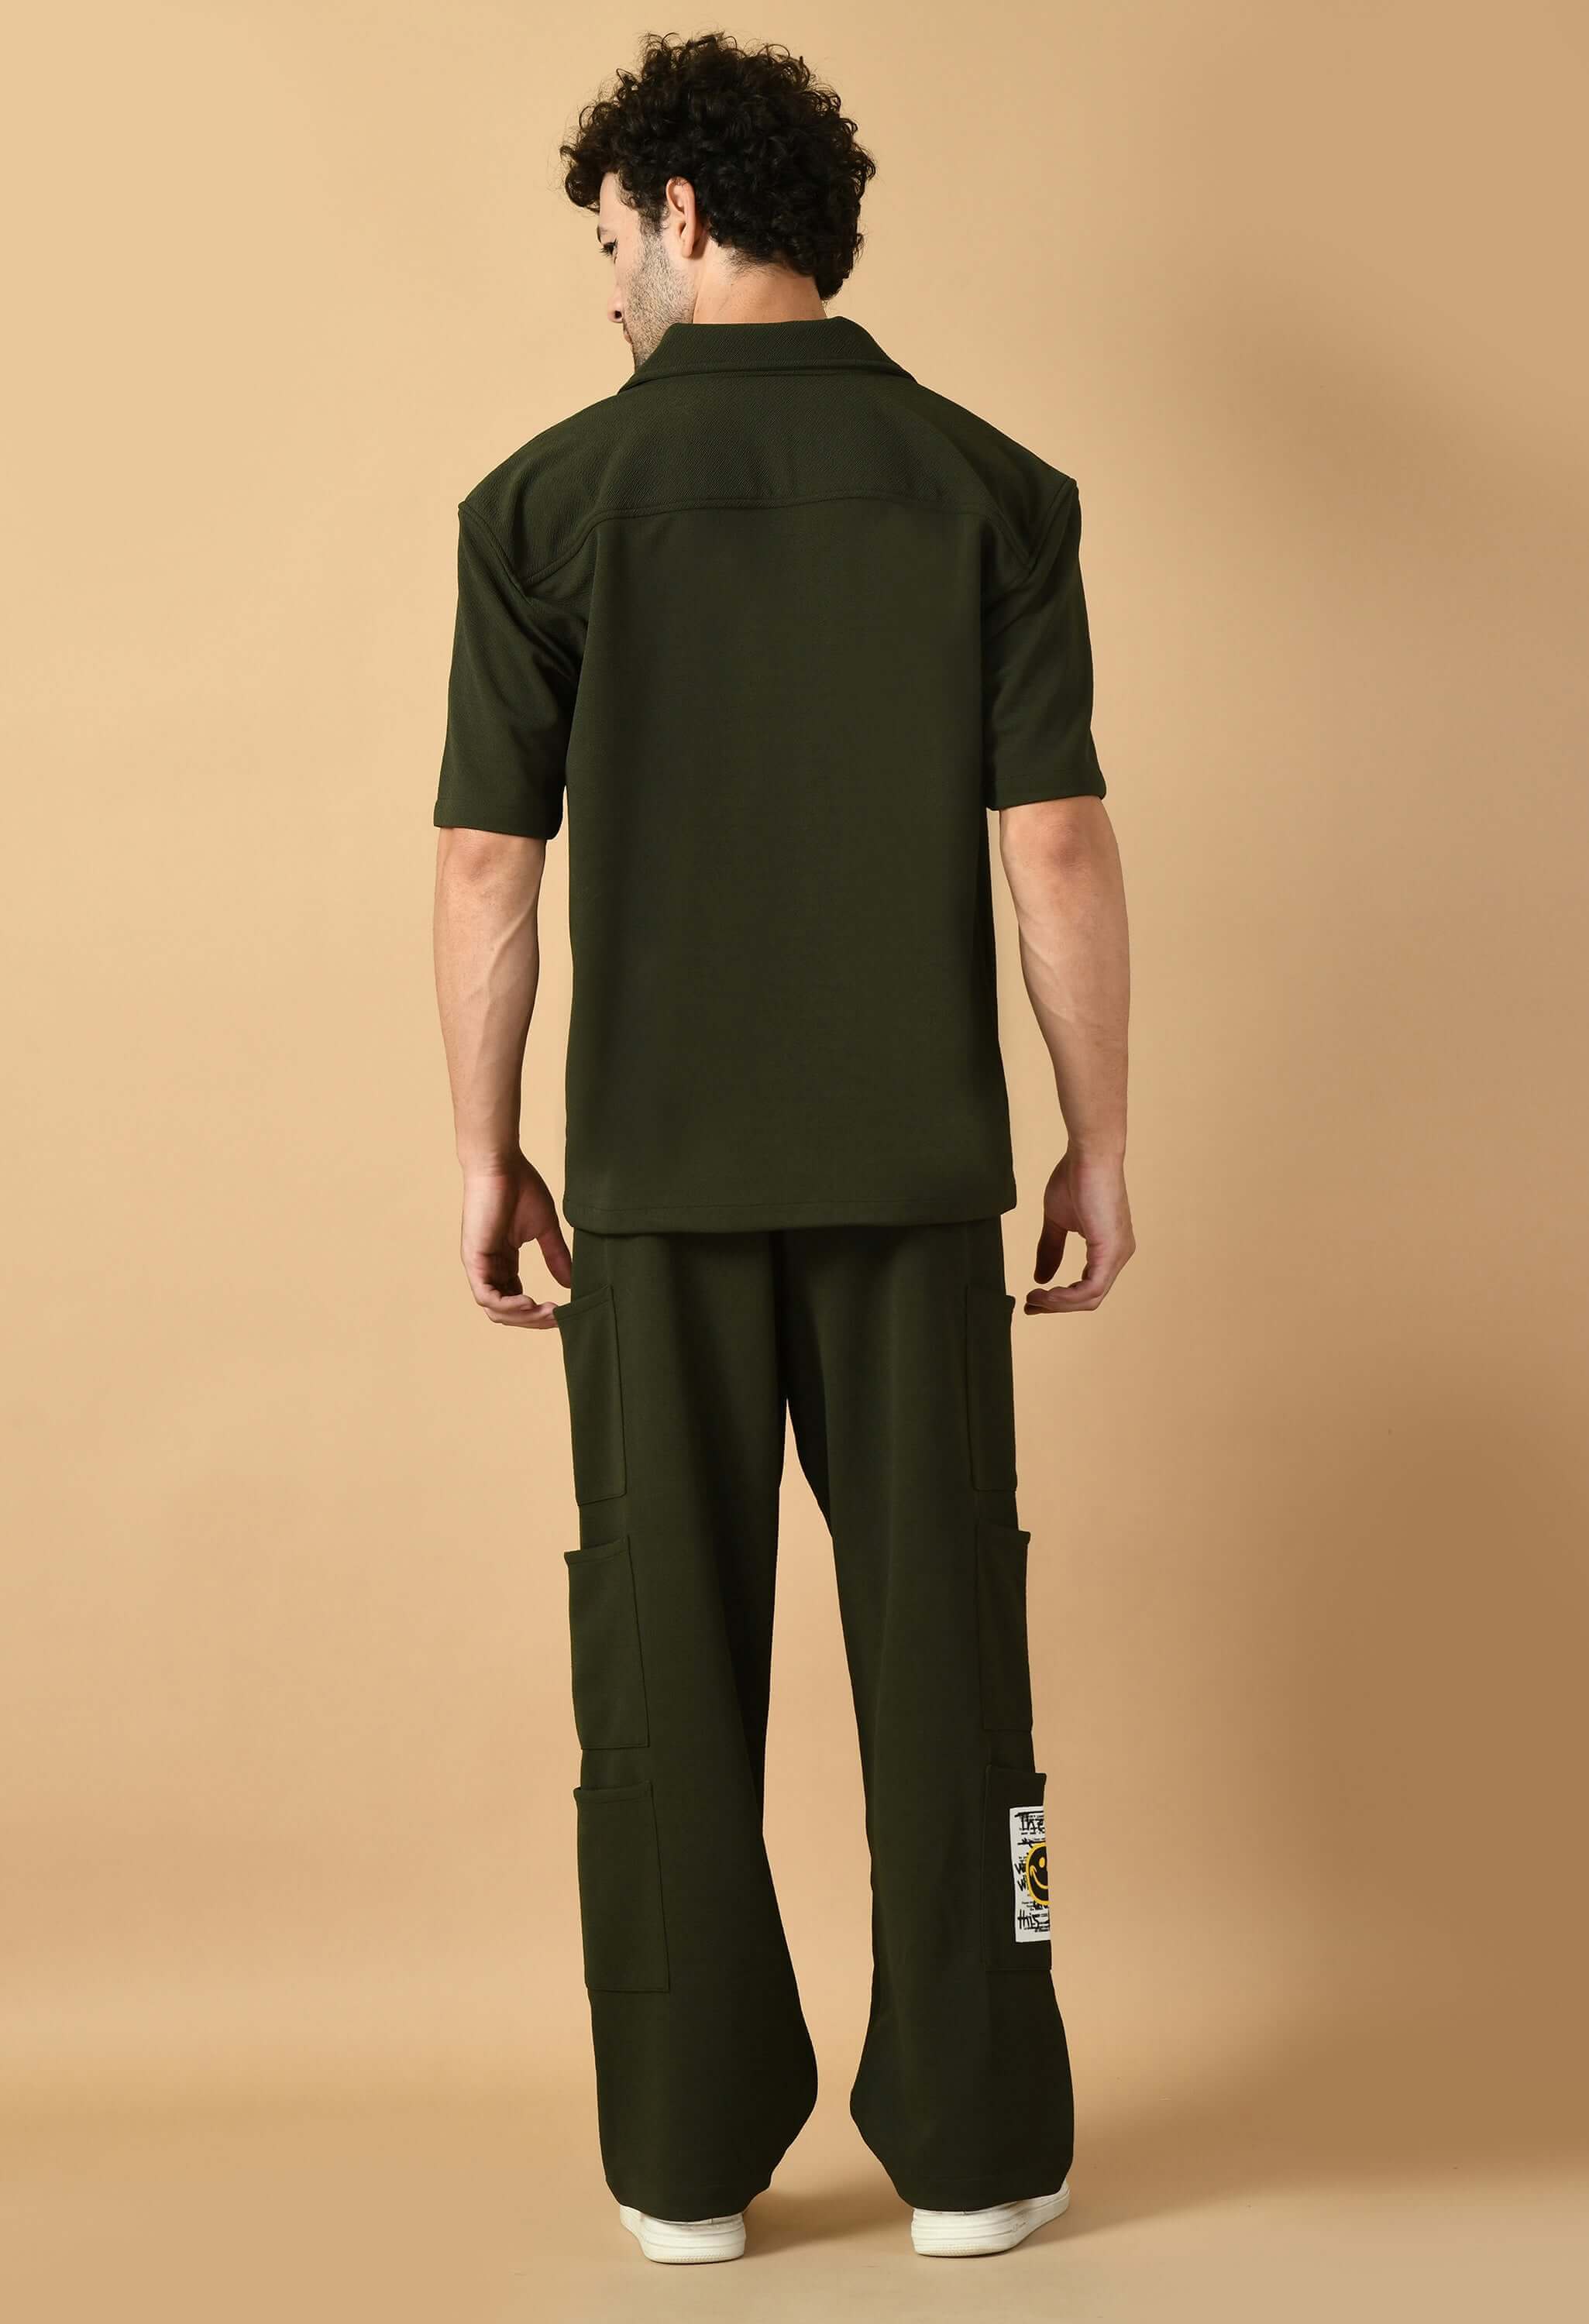 Men's olive green co-ord set by offmint